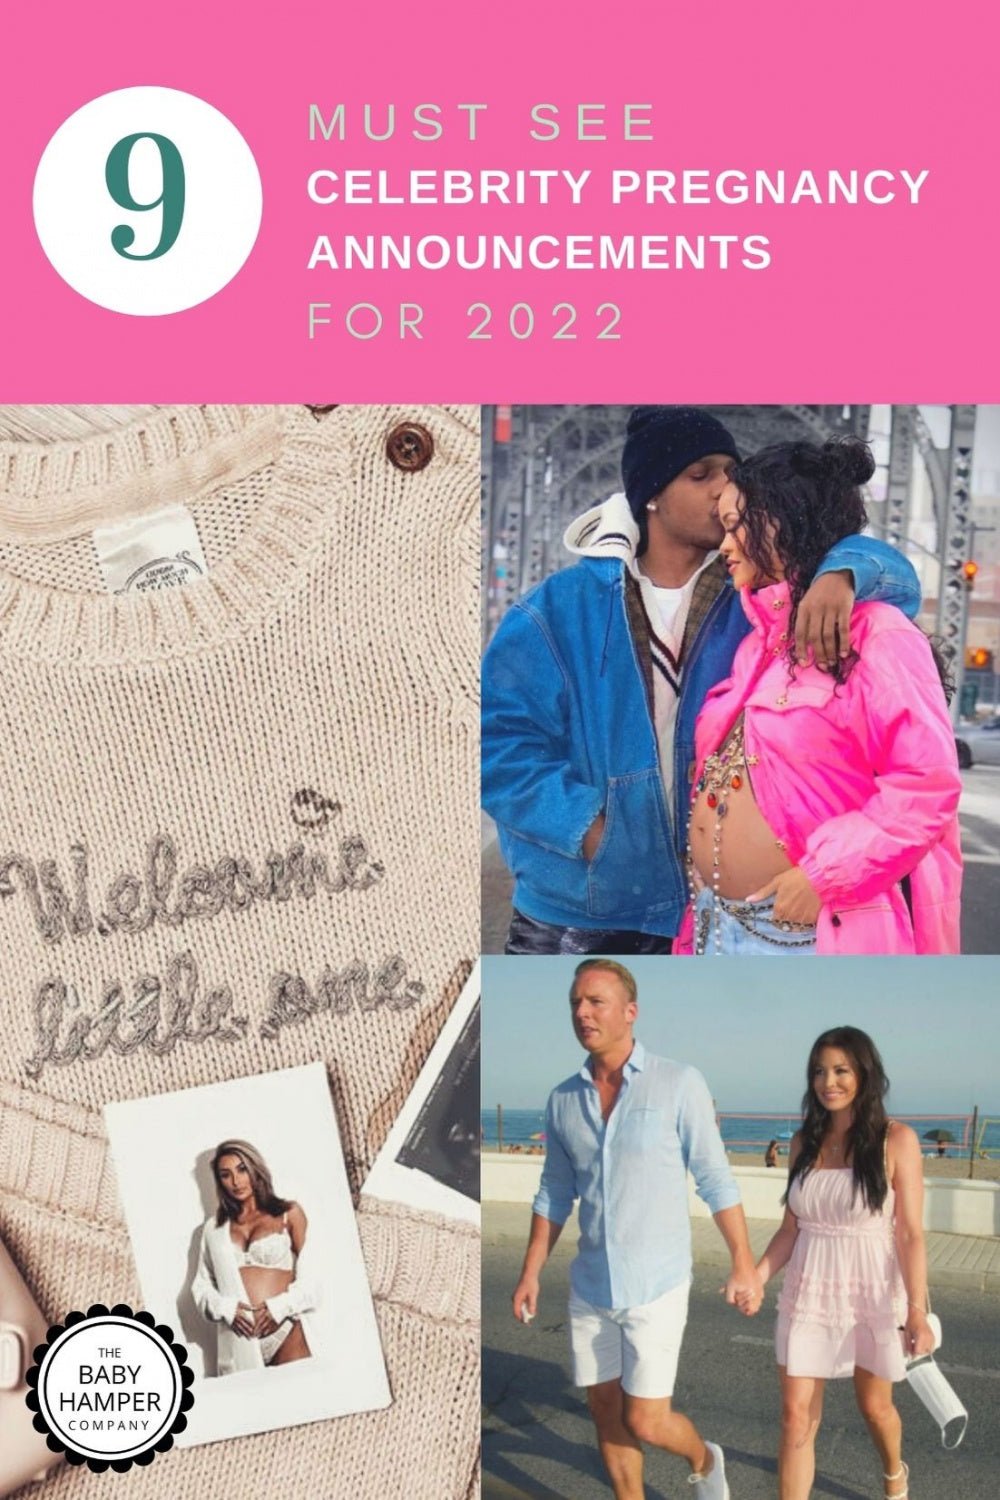 9 Must See Celebrity Pregnancy Announcements in 2022